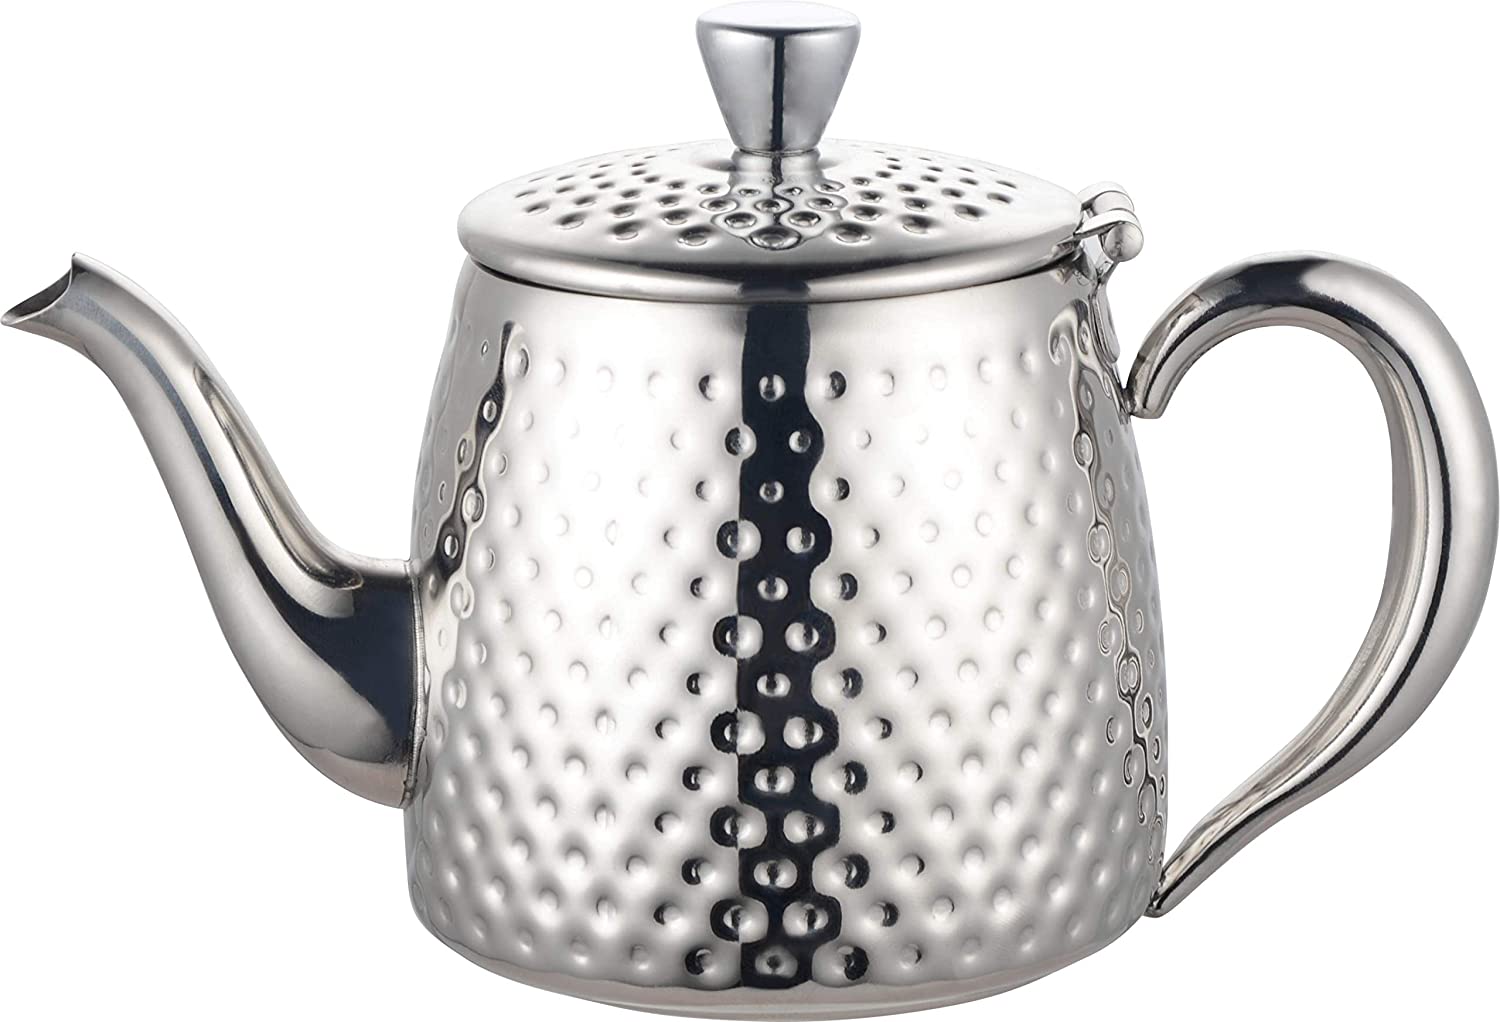 Cafe Ole Café Olé Sandringham Hammered Effect Teapot Made From High Quality 18/10 Stainless Steel - High Polish 48oz 1.35L Non Drip Cast Hollow Handles